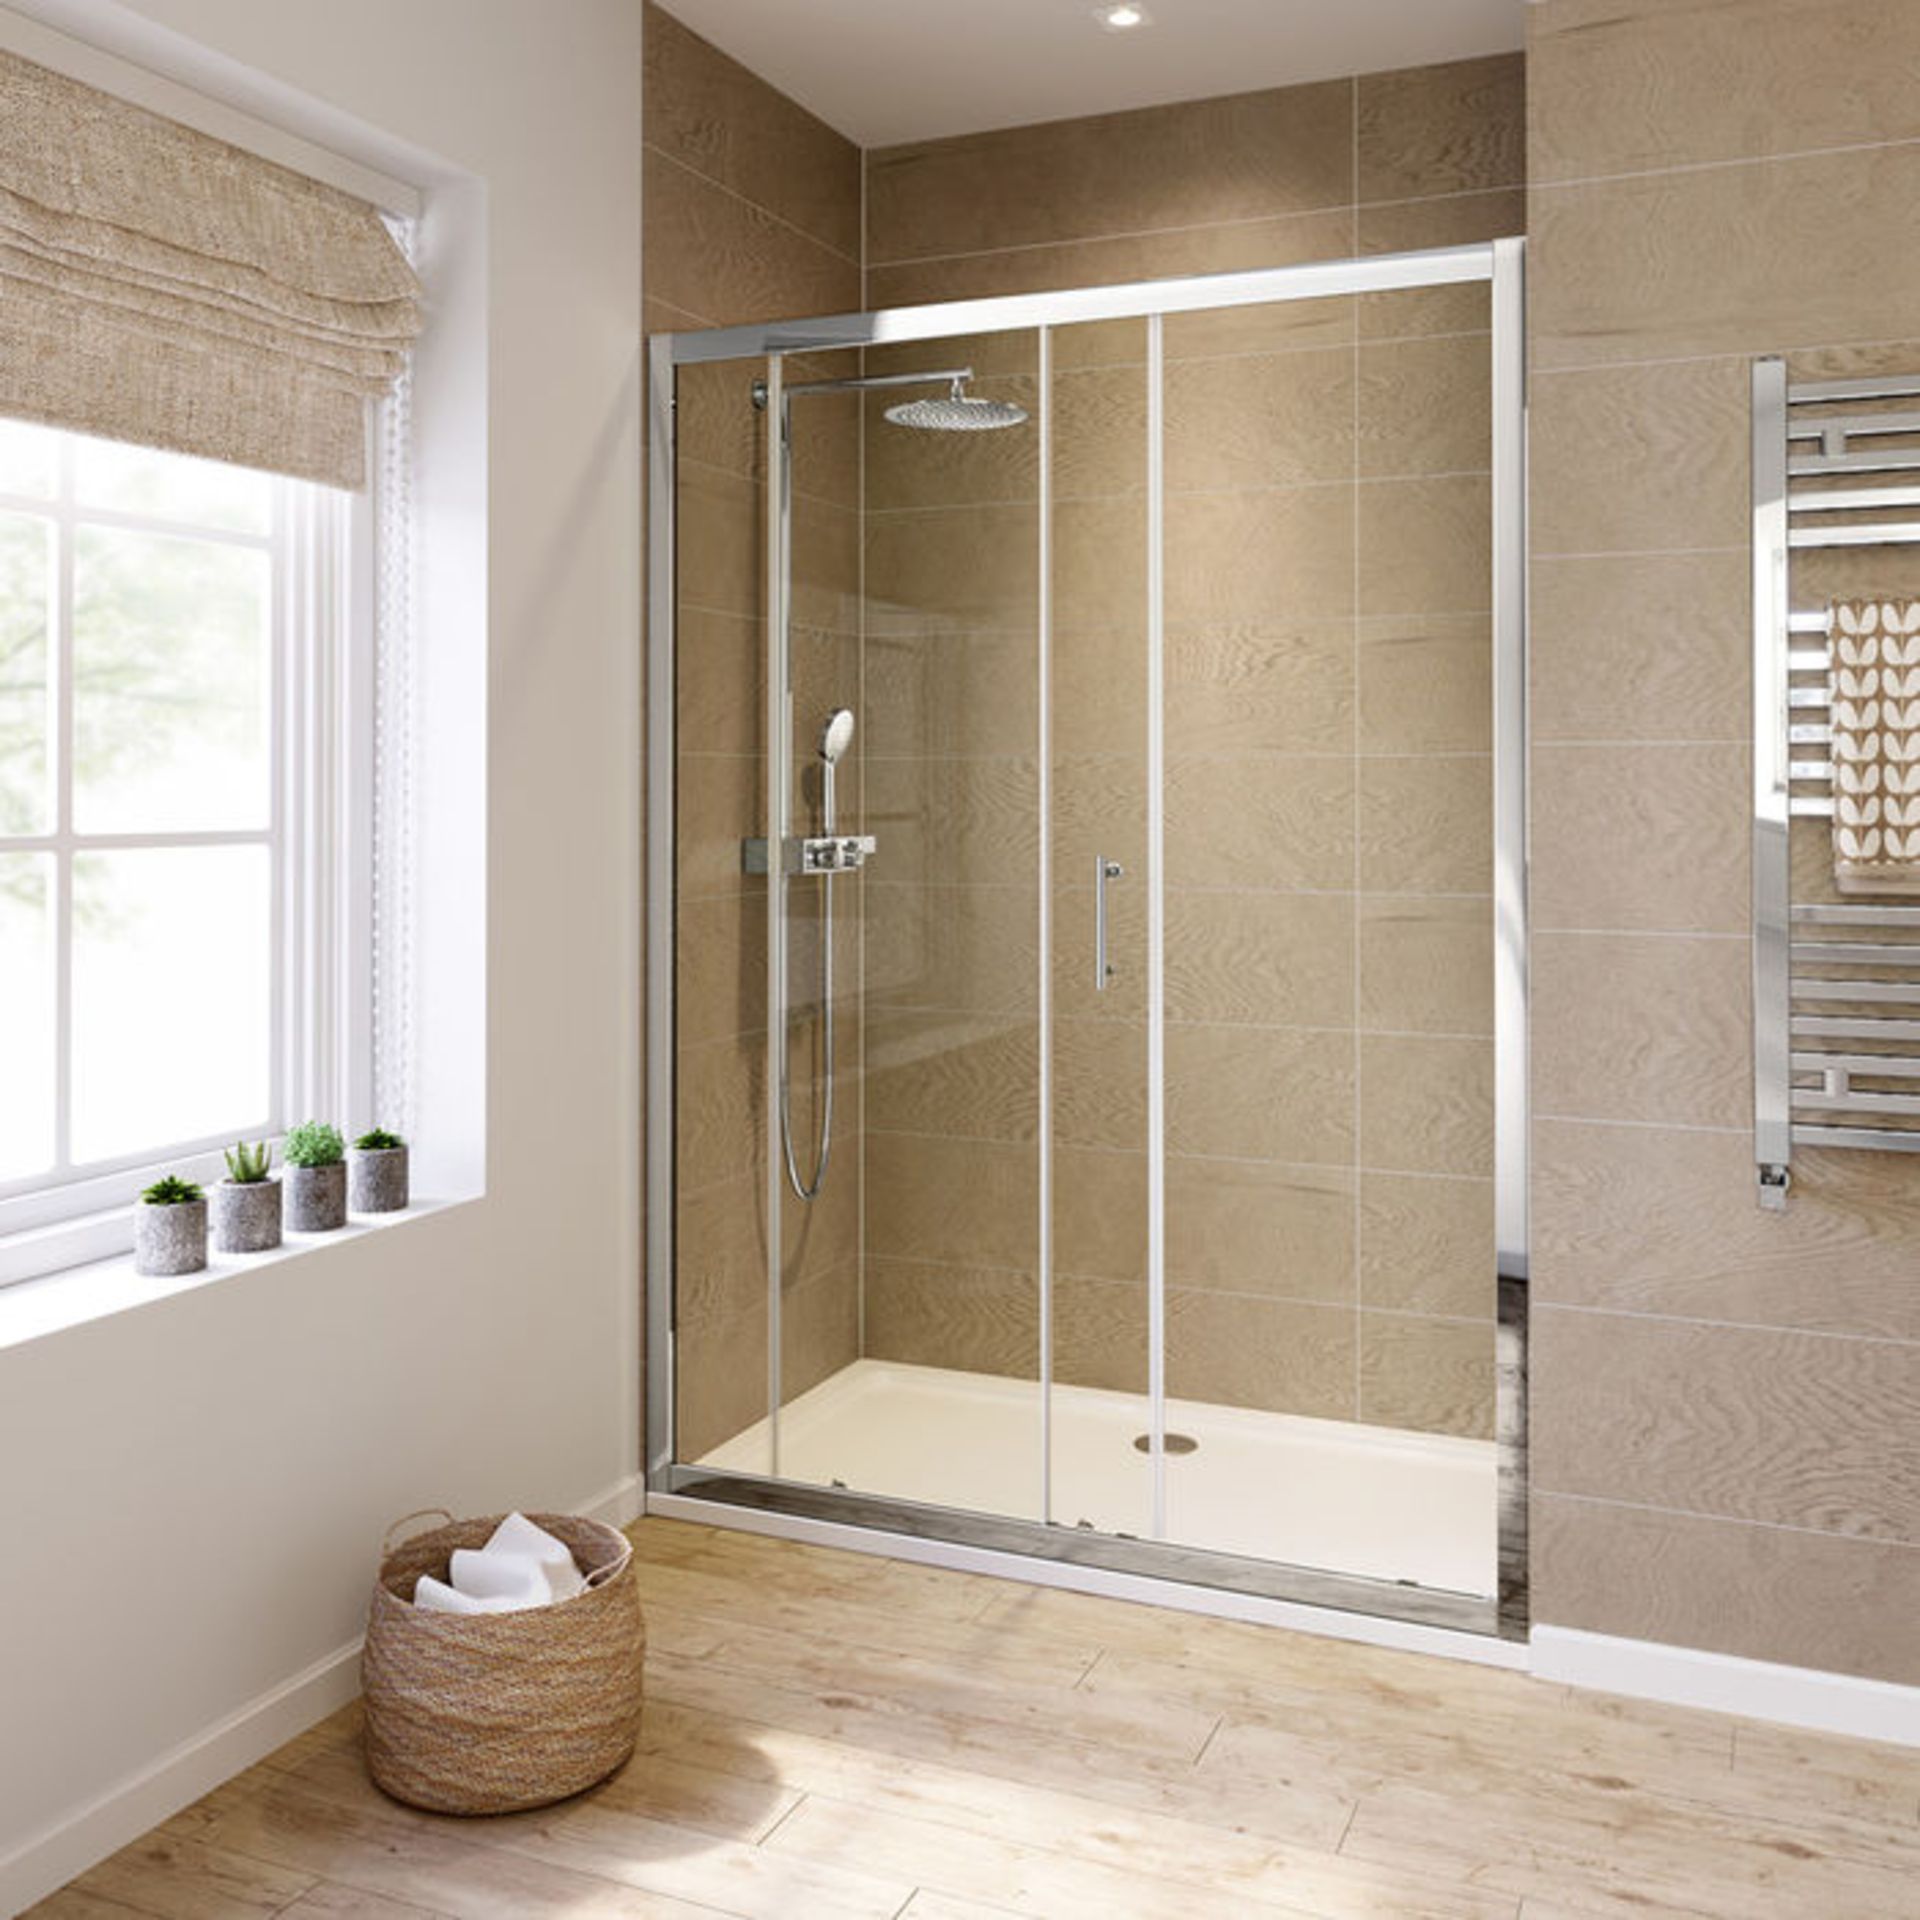 (XM153) 1400mm - 6mm - Elements Sliding Shower Door. RRP £299.99. 6mm Safety Glass Fully - Image 3 of 4